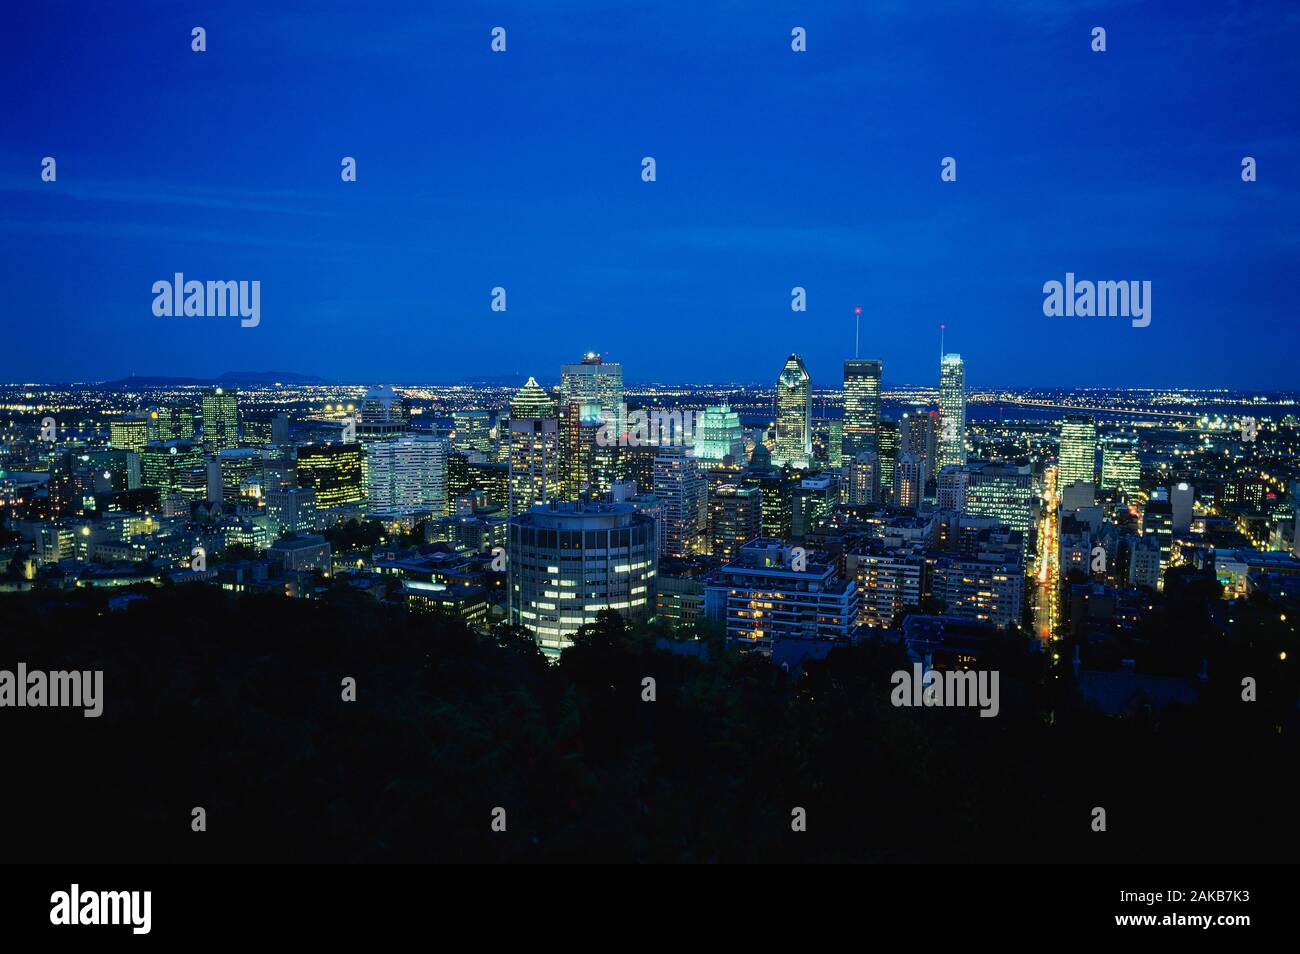 Cityscape of Montreal with illuminated skyscrapers at night, Quebec, Canada Stock Photo